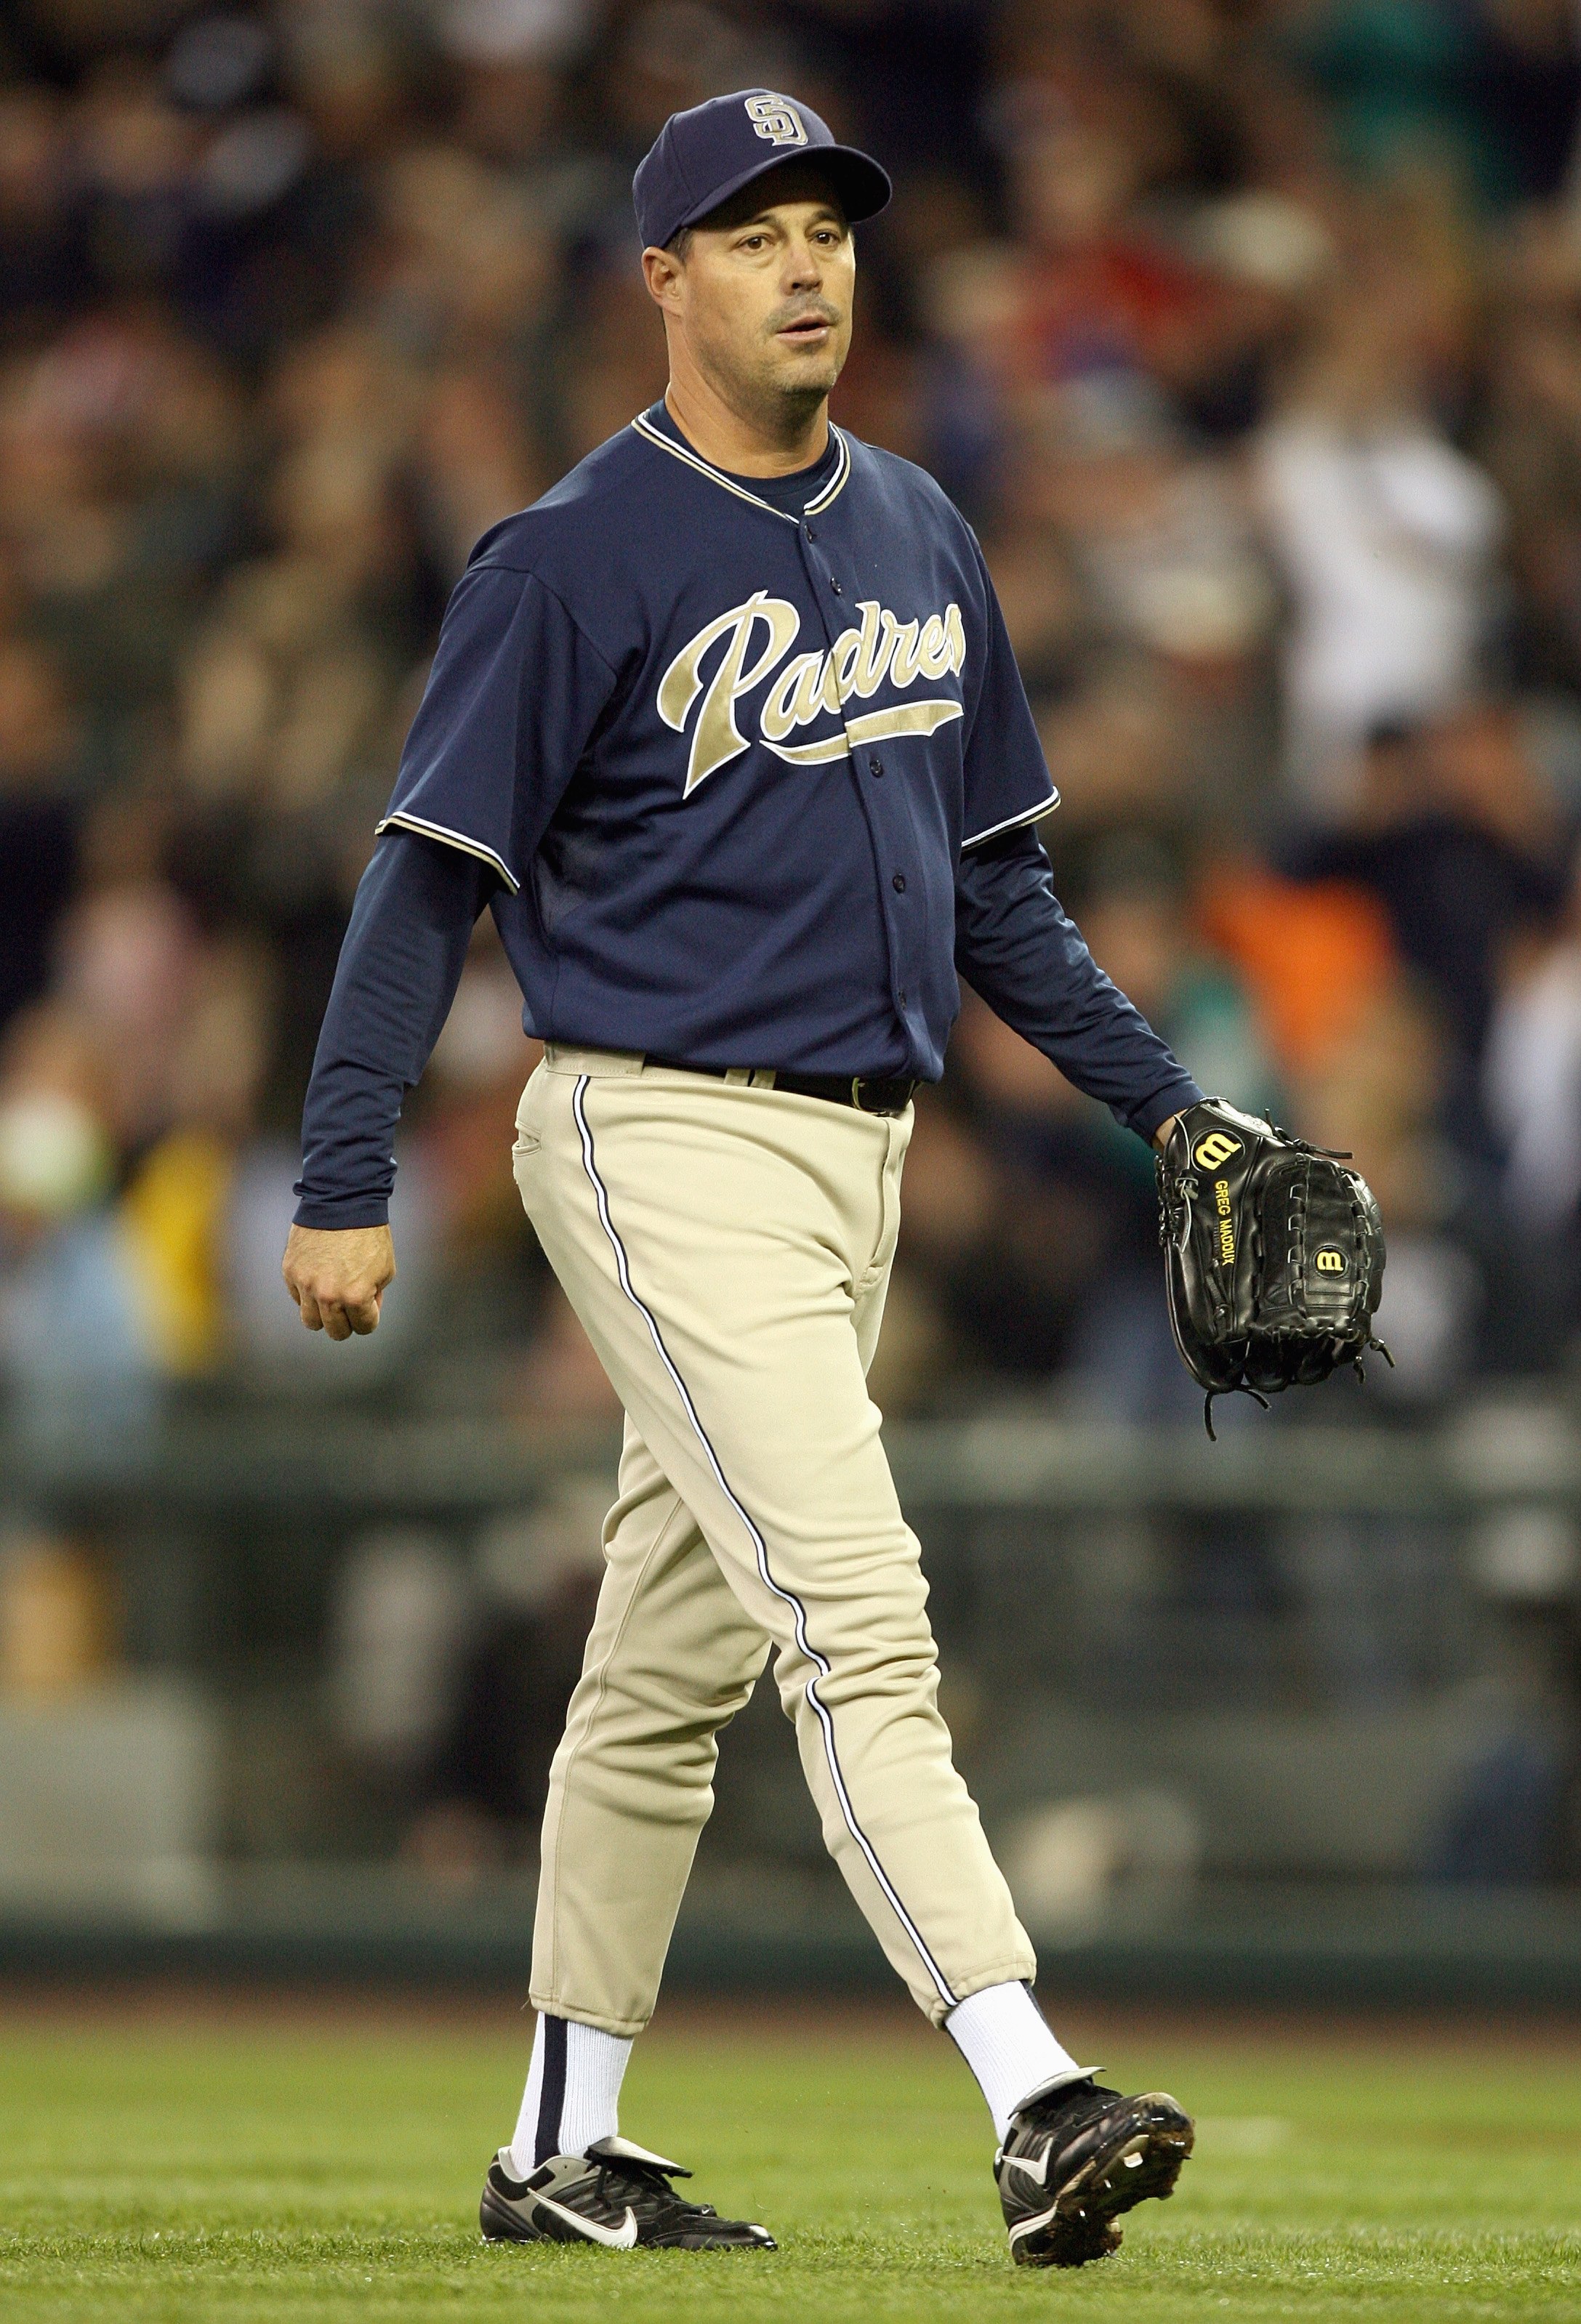 SEATTLE - MAY 19: Greg Maddux #30  of the San Diego Padres walks off the field against the Seattle Mariners at Safeco Field on May 19, 2007 in Seattle, Washington. (Photo by Otto Greule Jr/Getty Images)